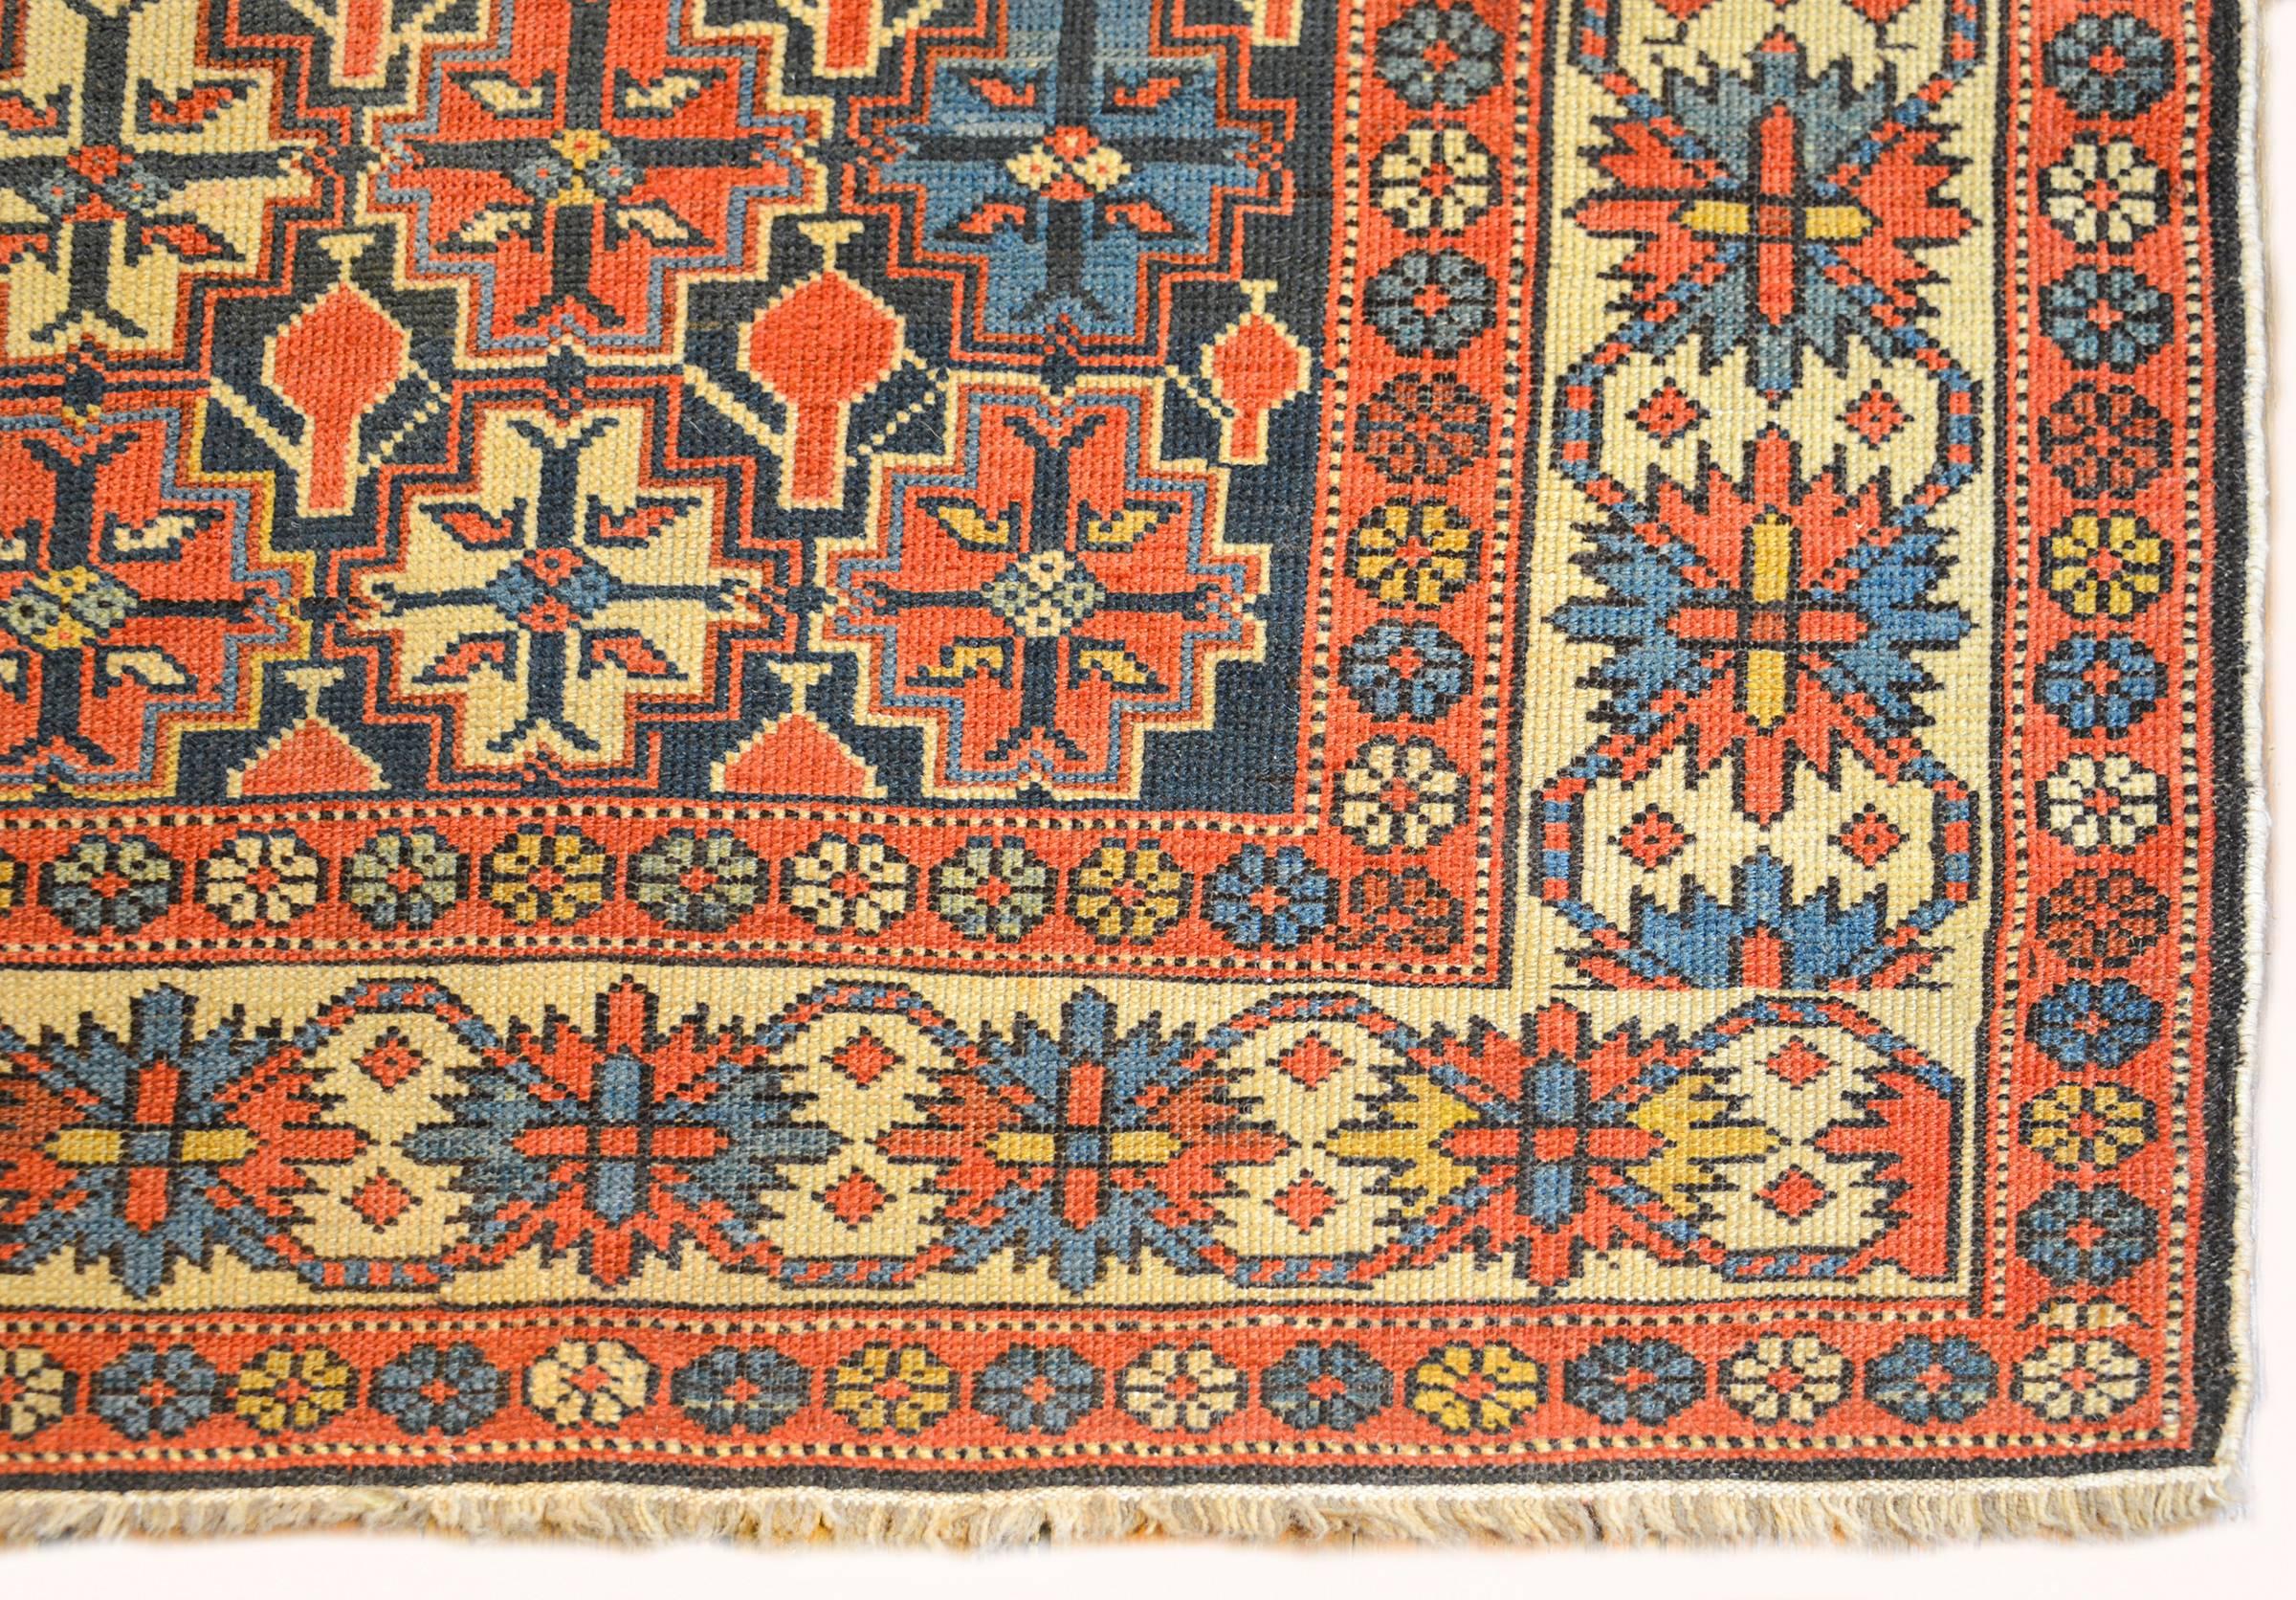 An amazing late 19th century Persian Shrivan rug with an incredible all-over geometric stylized floral pattern woven in crimson, indigo and natural wool, on a dark indigo field. The border is complementary with similar geometric floral pattern with